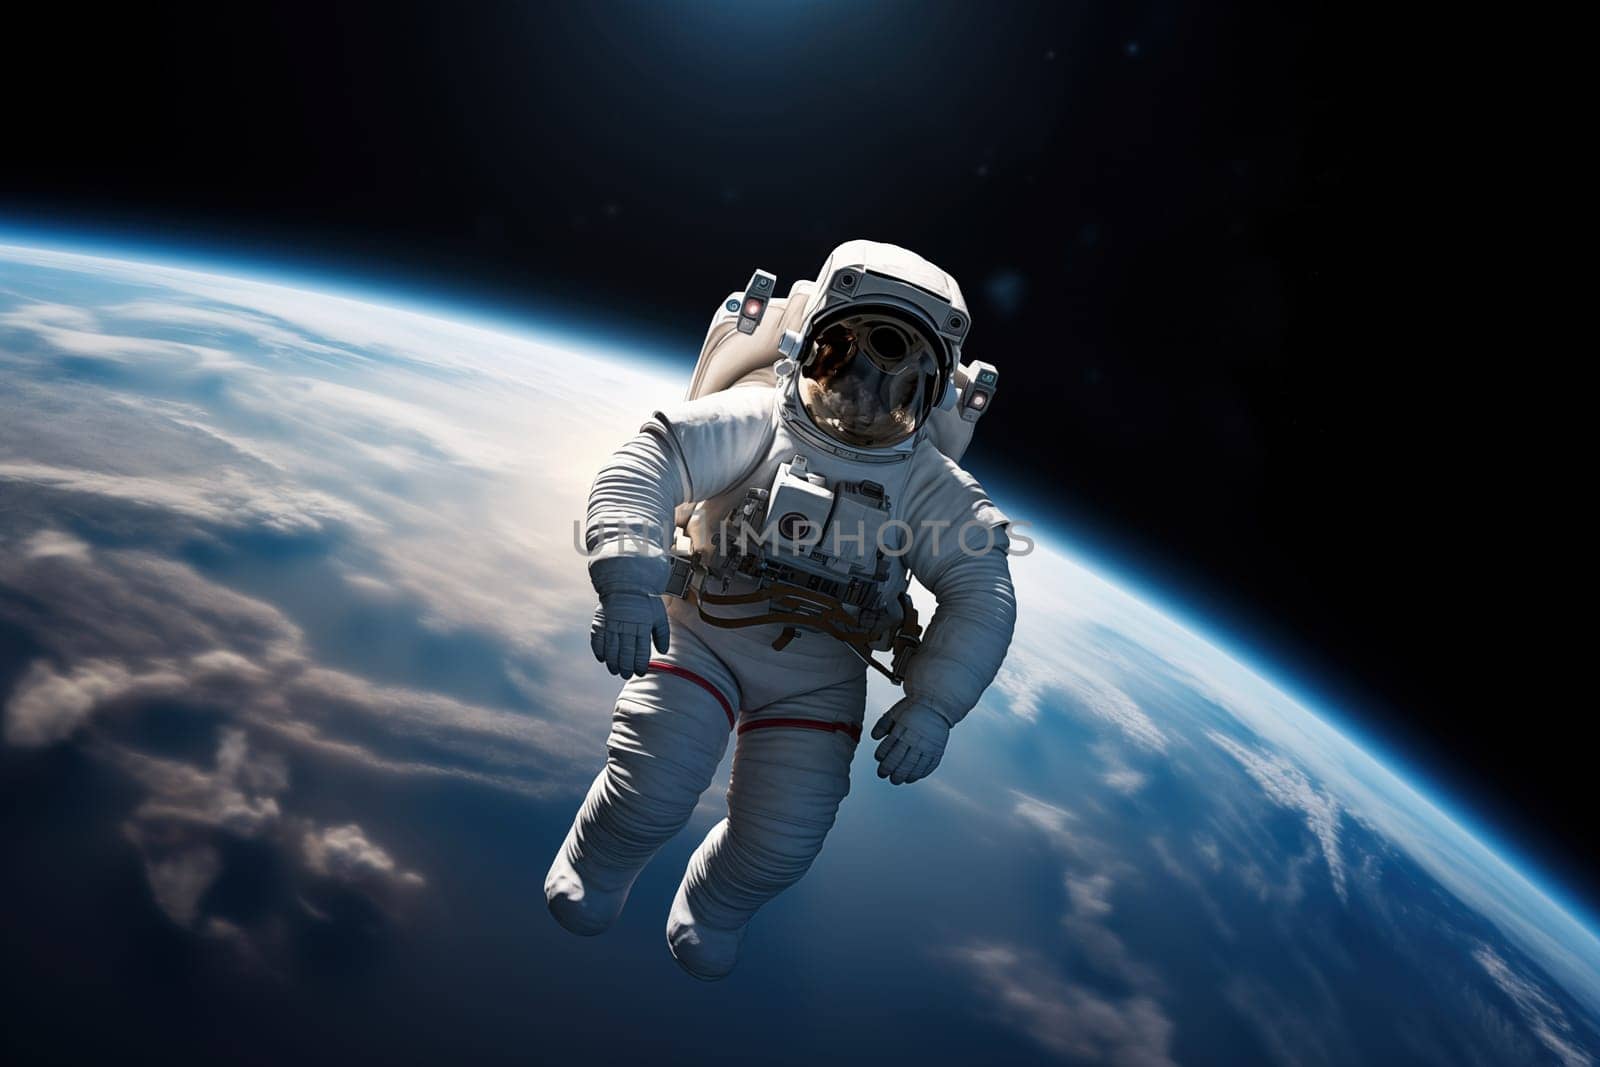 Astronaut Floating Above Earth in Space by dimol